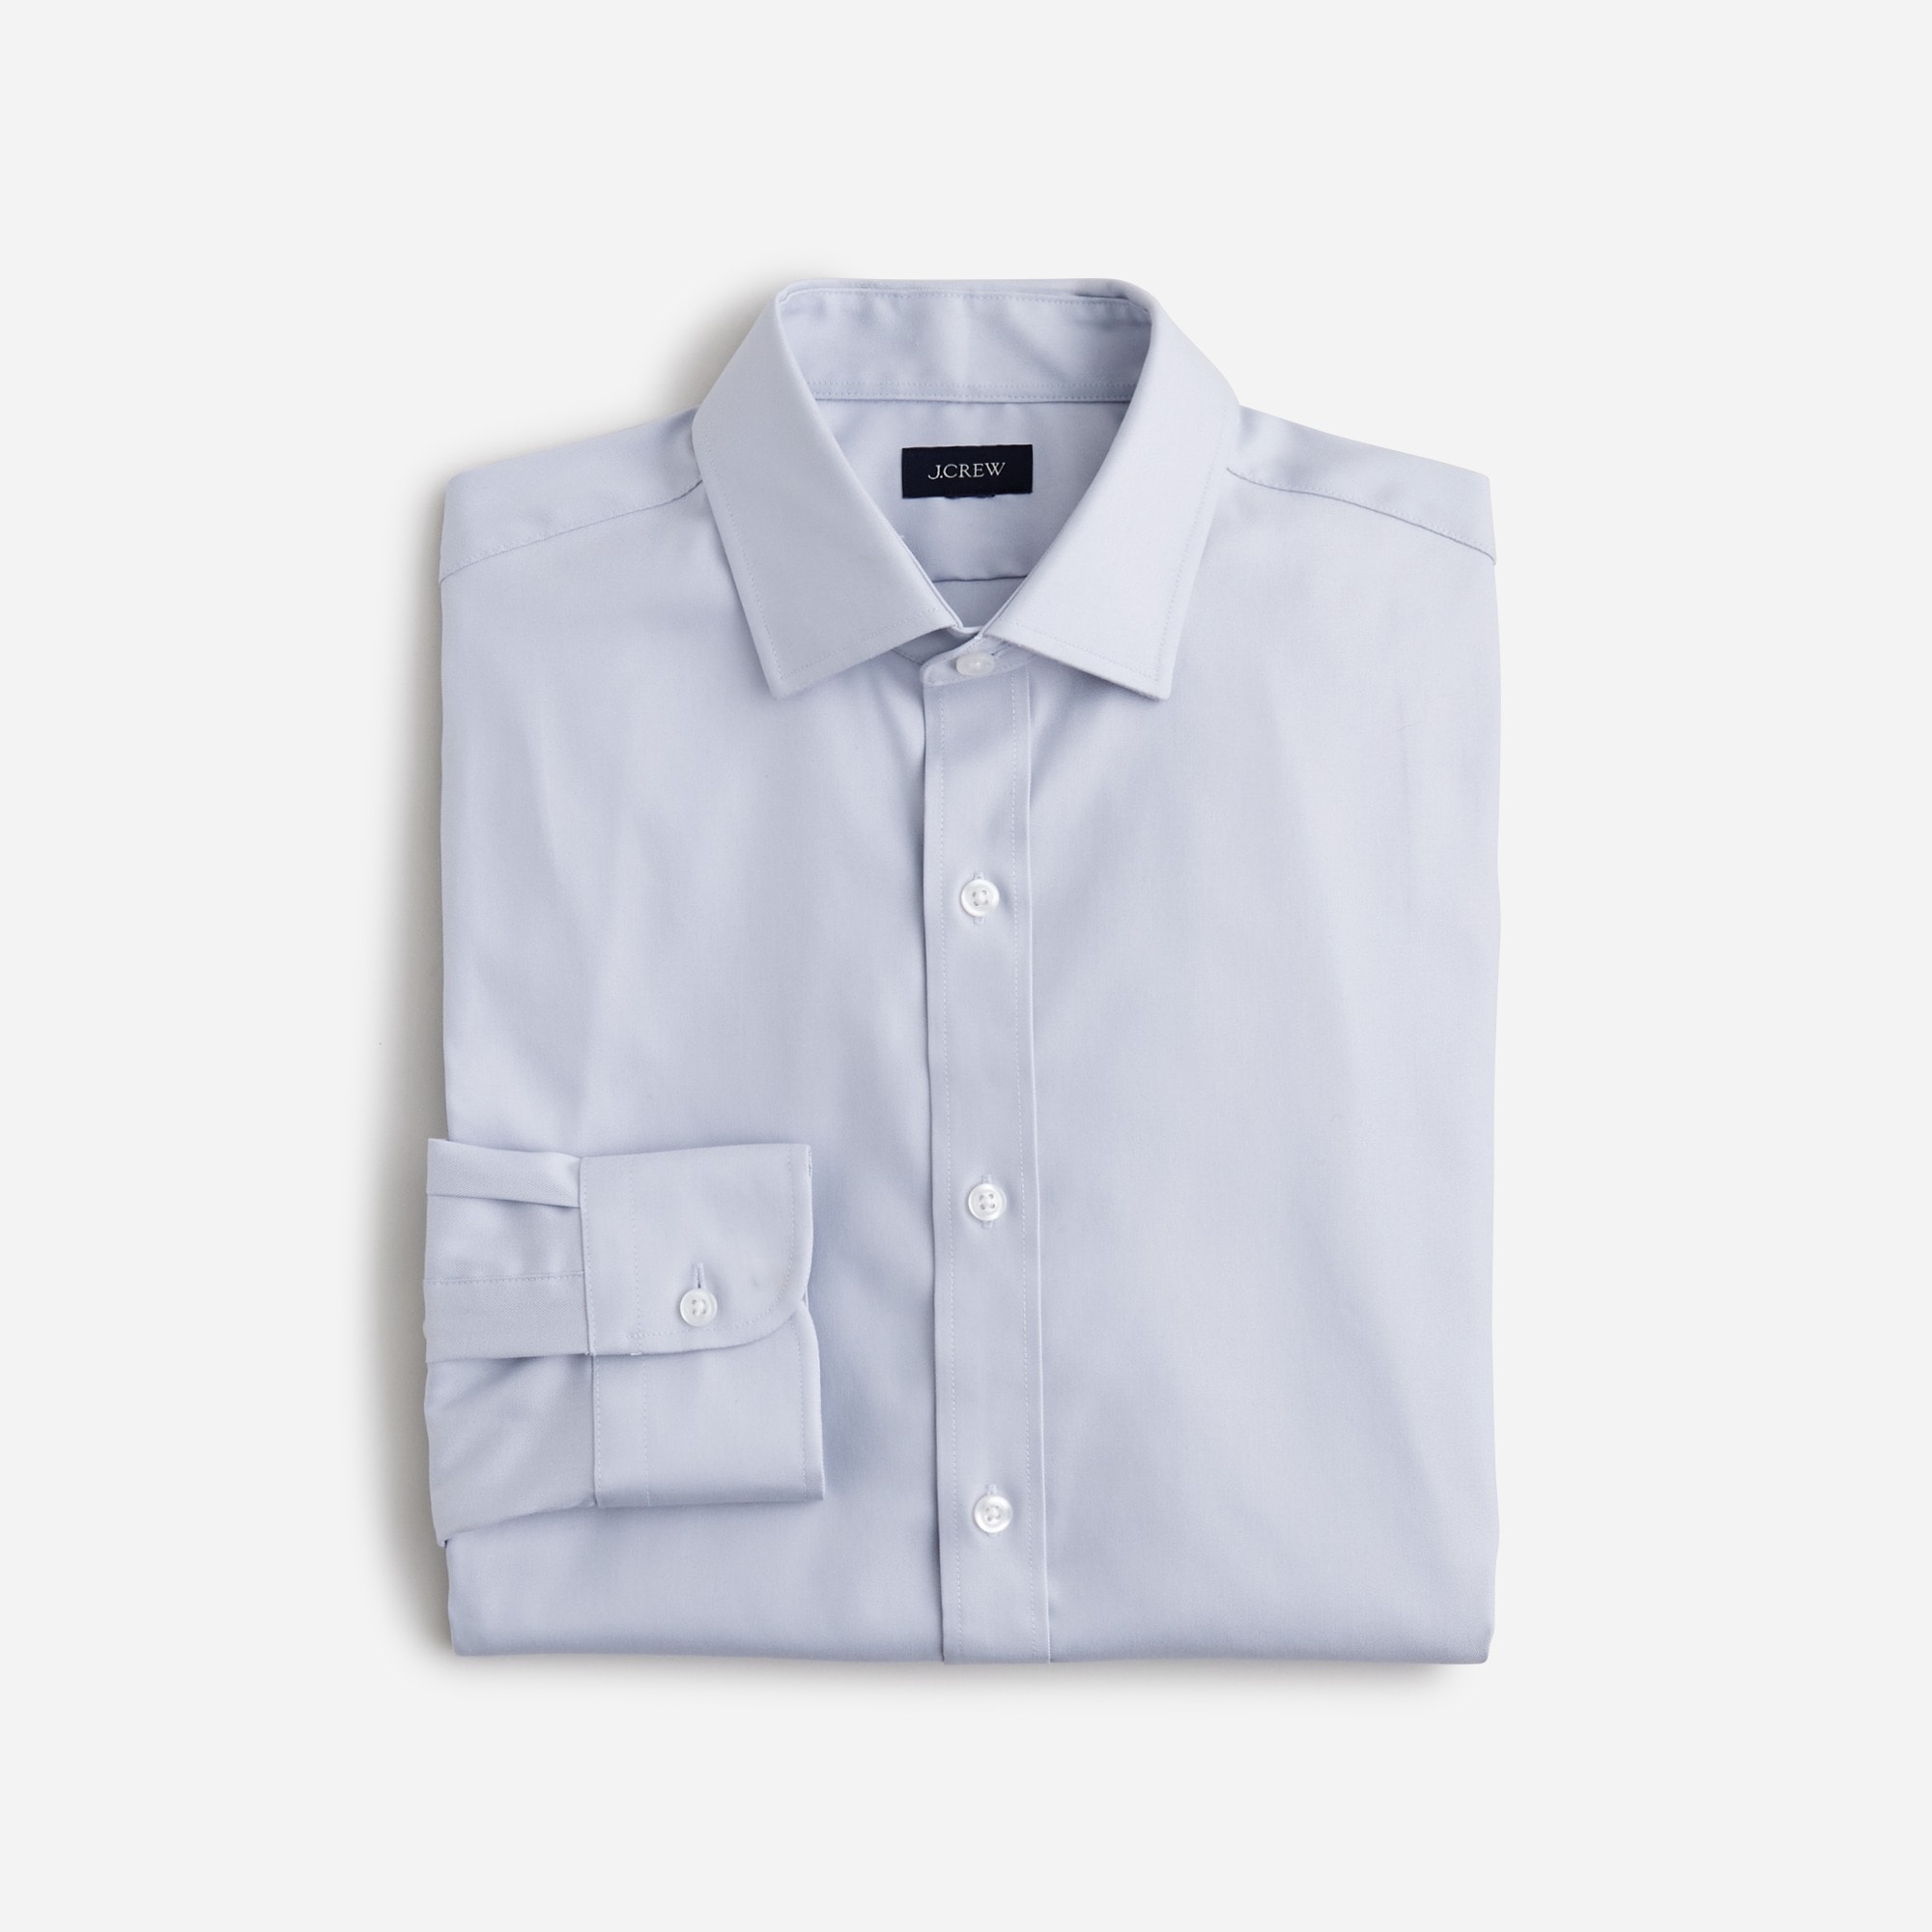  Bowery performance stretch dress shirt with spread collar